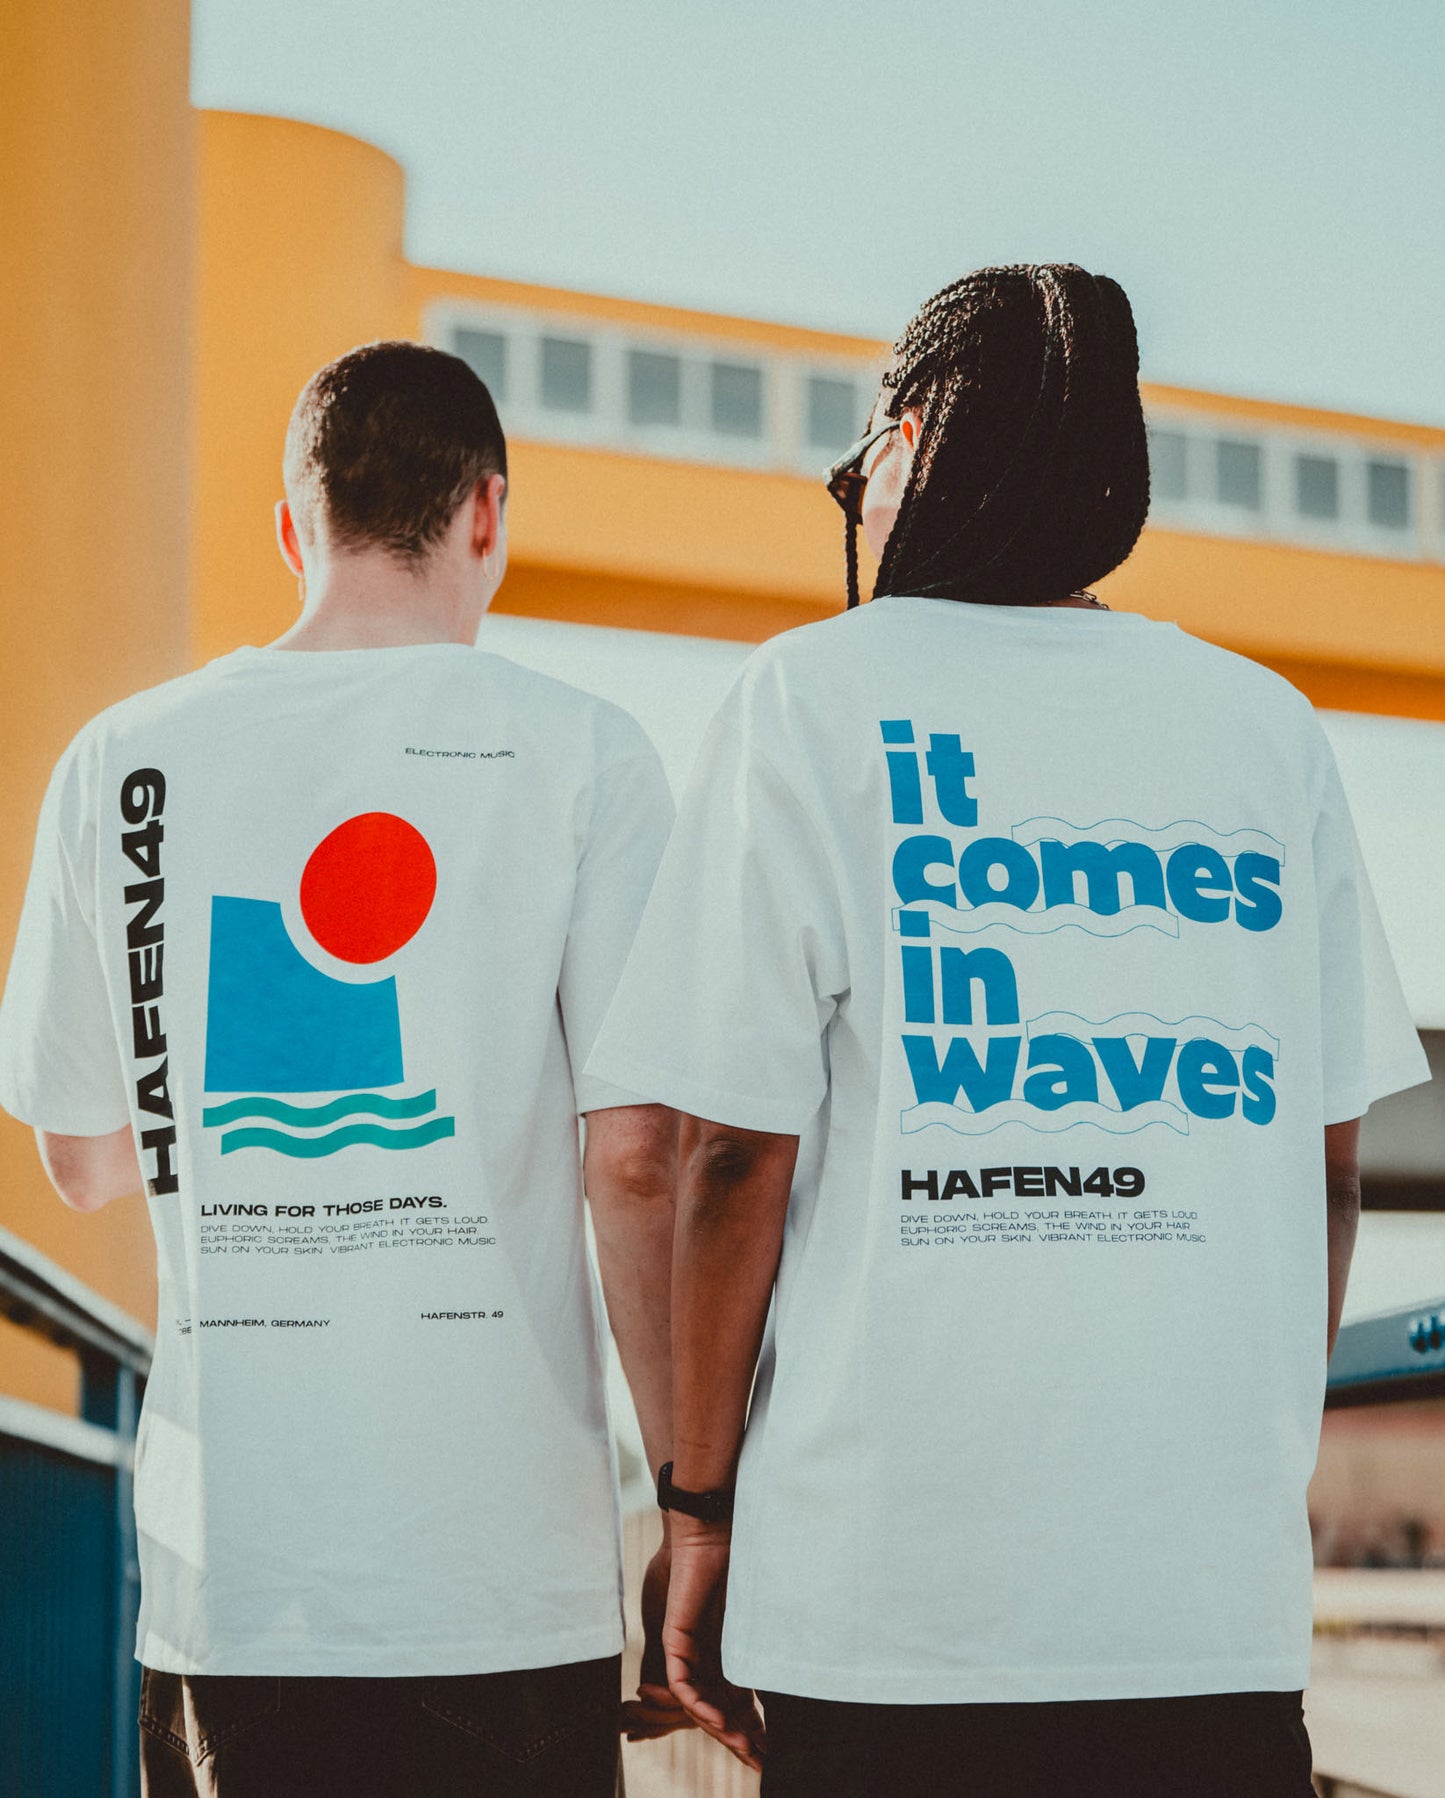 Oversized Shirt "IT COMES IN WAVES"